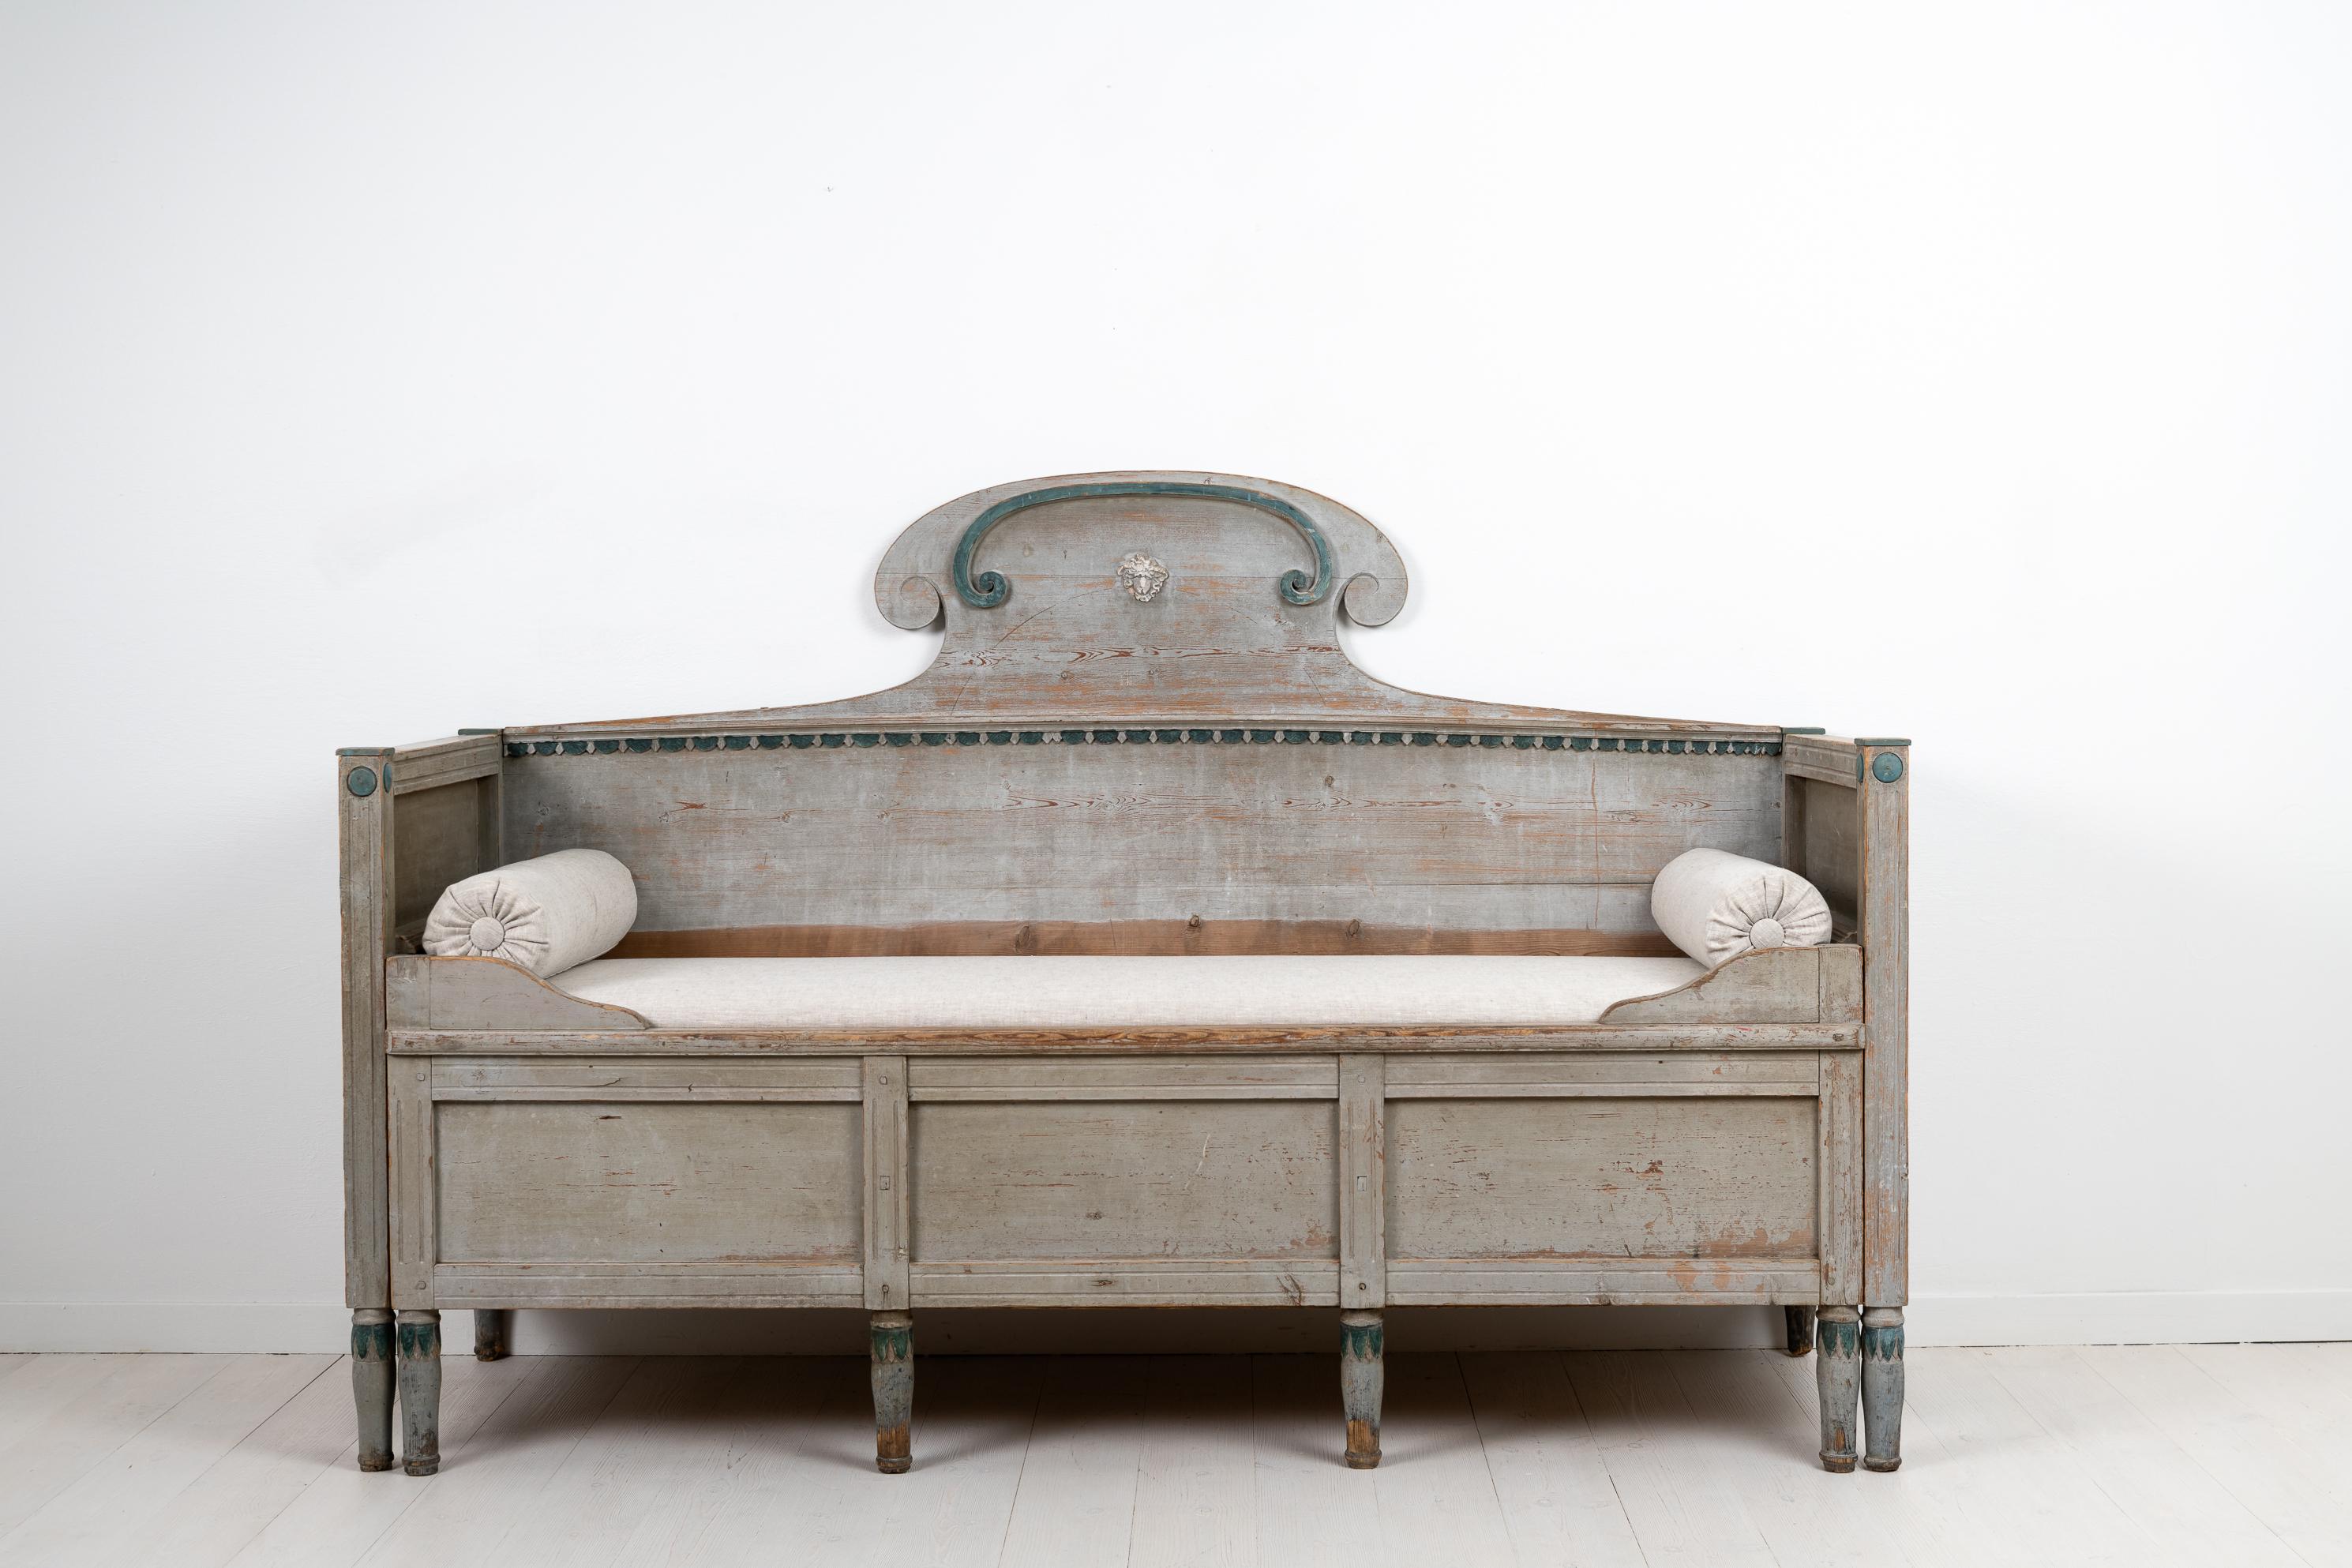 Gustavian Provincial sofa from the Swedish area Forsa in Hälsingland. The sofa is from the early 1800s, around 1820, and has the original grey paint with green accents. After being in use for 200 years the sofa has the genuine distress and patina of